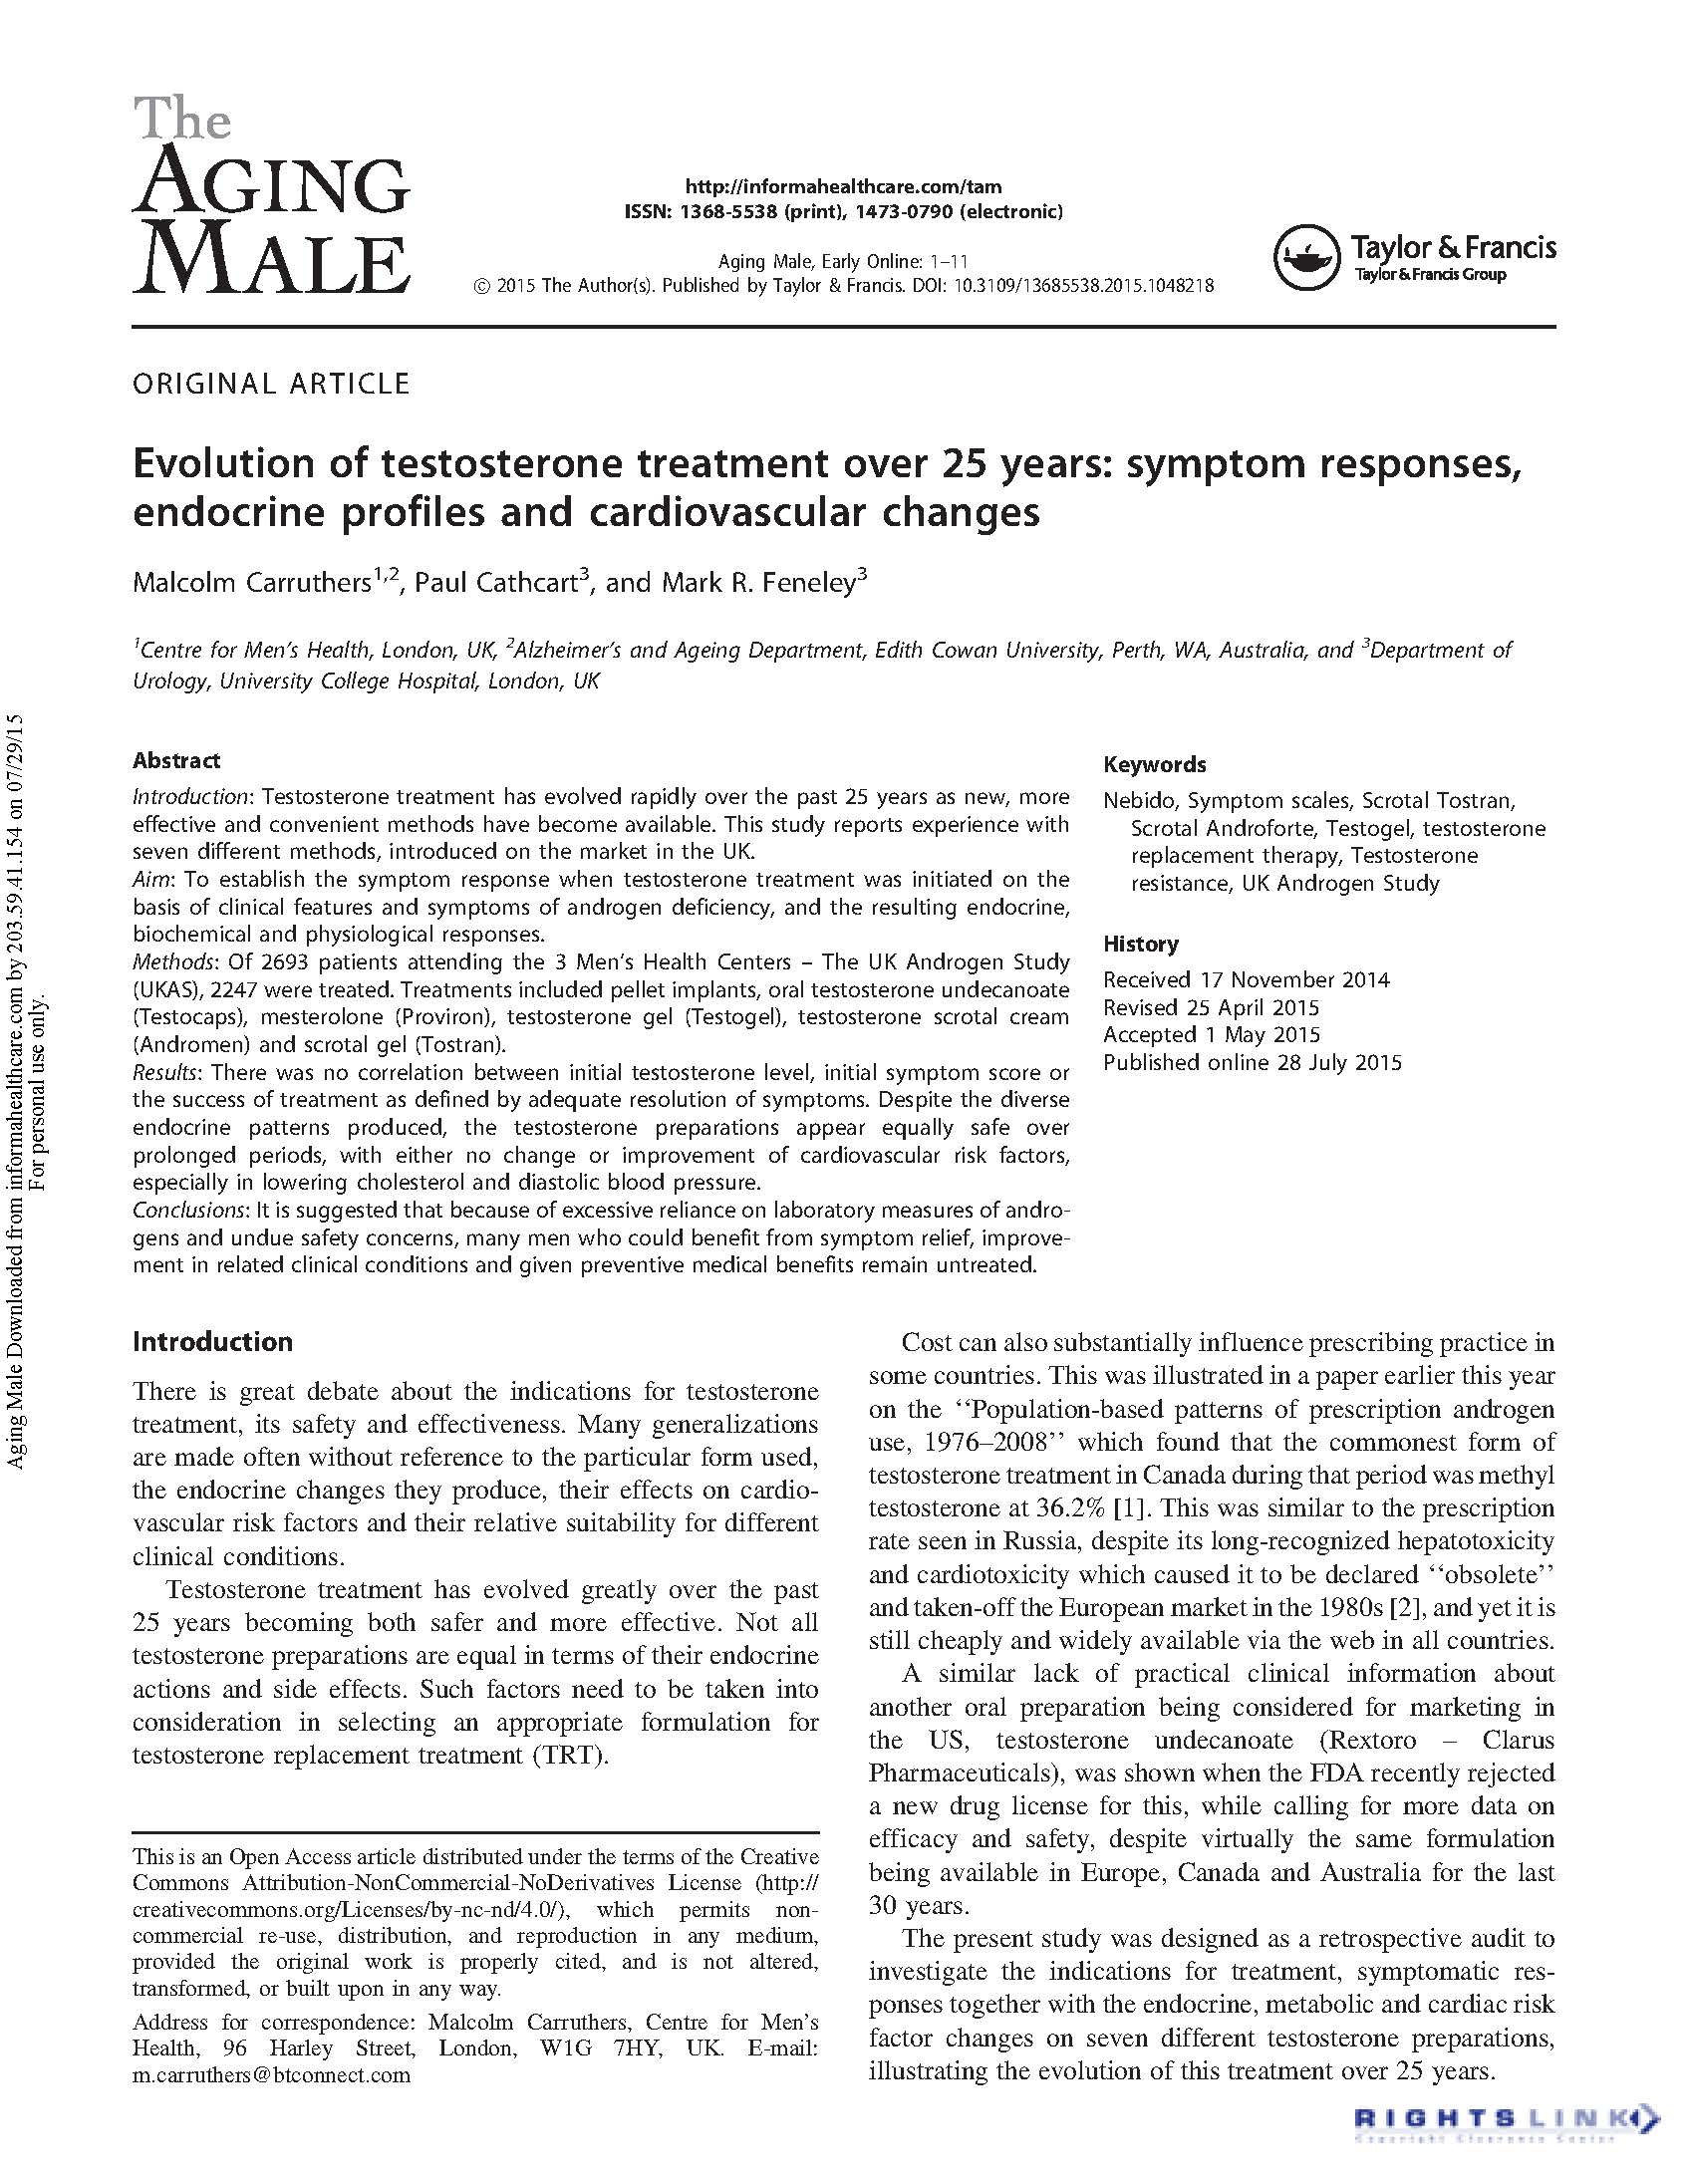 Evolution of testosterone treatment over 25 years: symptom responses, endocrine profiles and cardiovascular changes